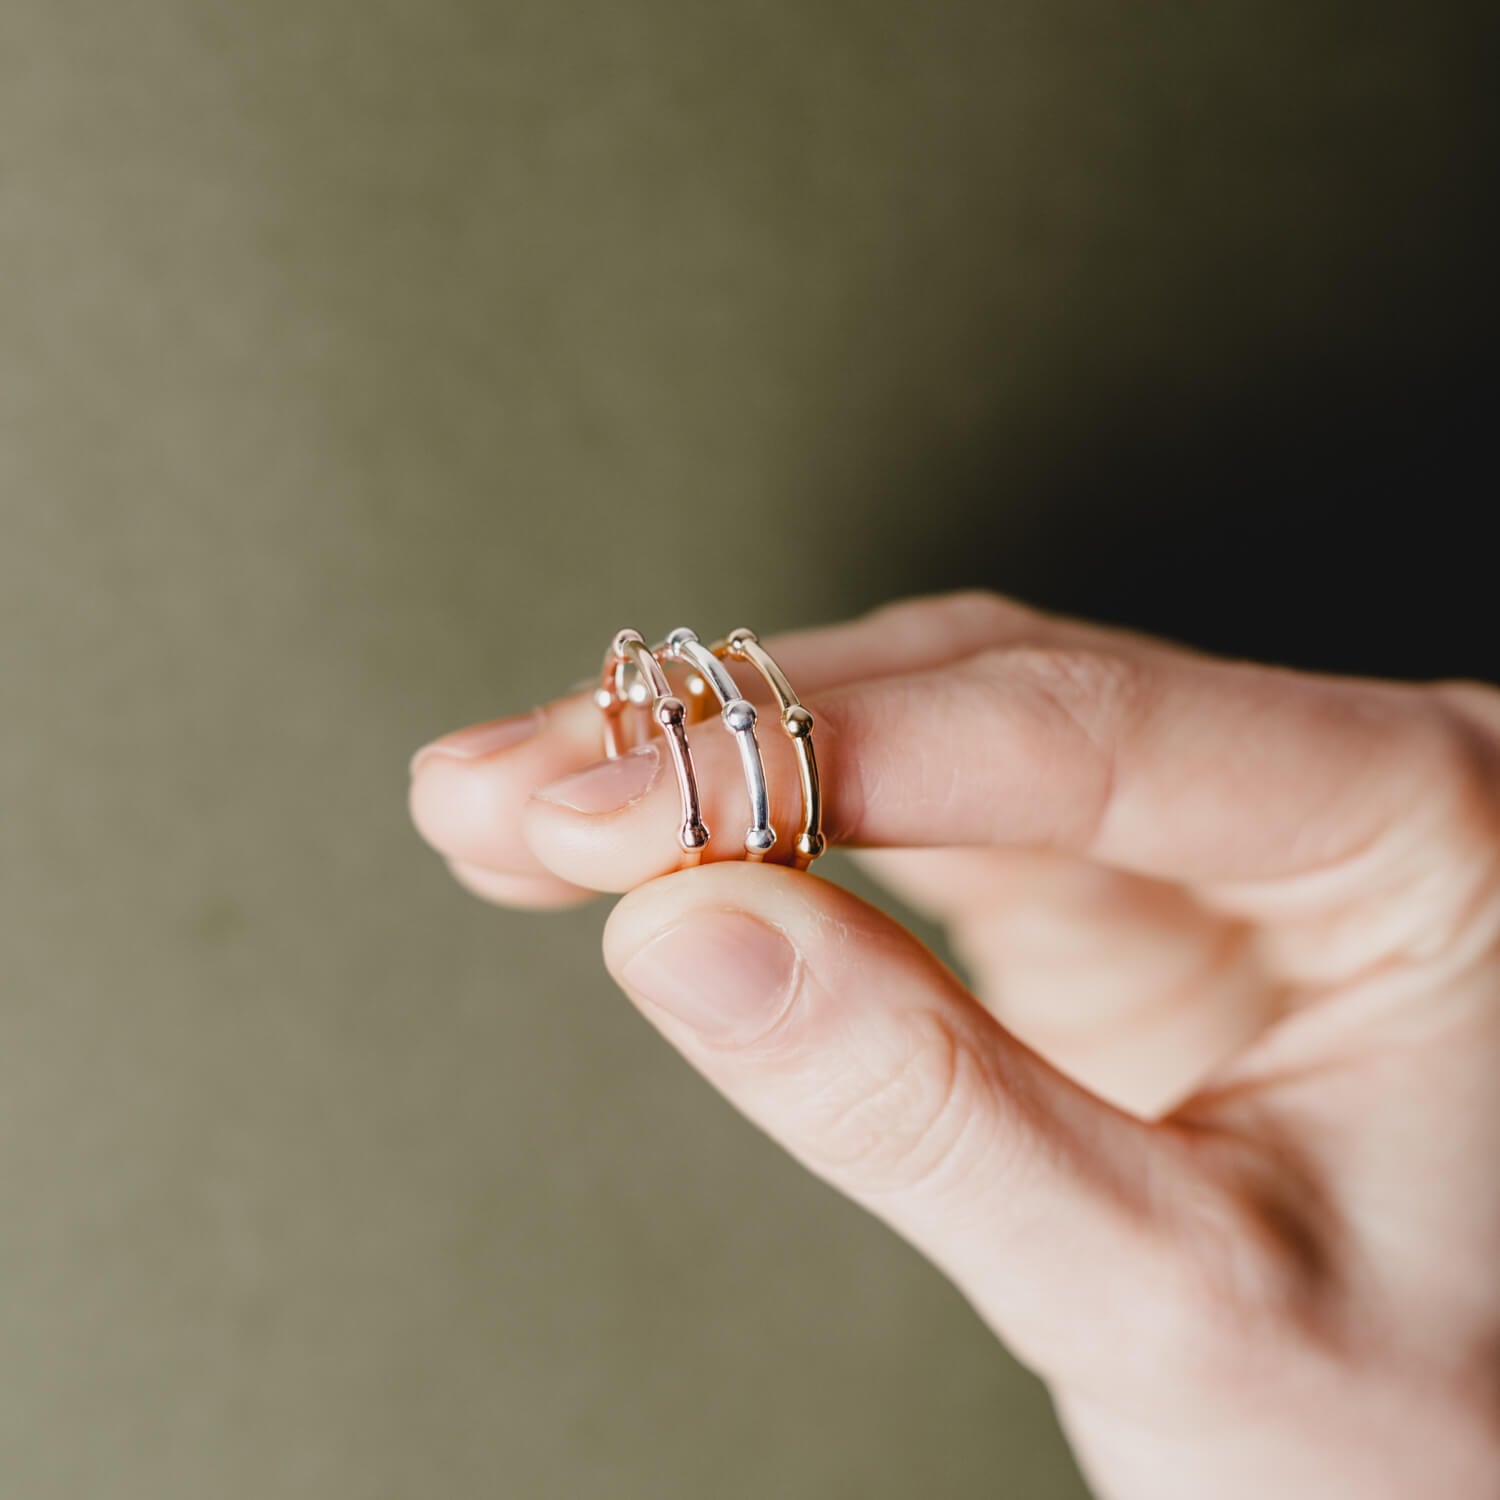 A close up of a hand holding three rings made from beaded wire, one gold, one silver and one rose gold